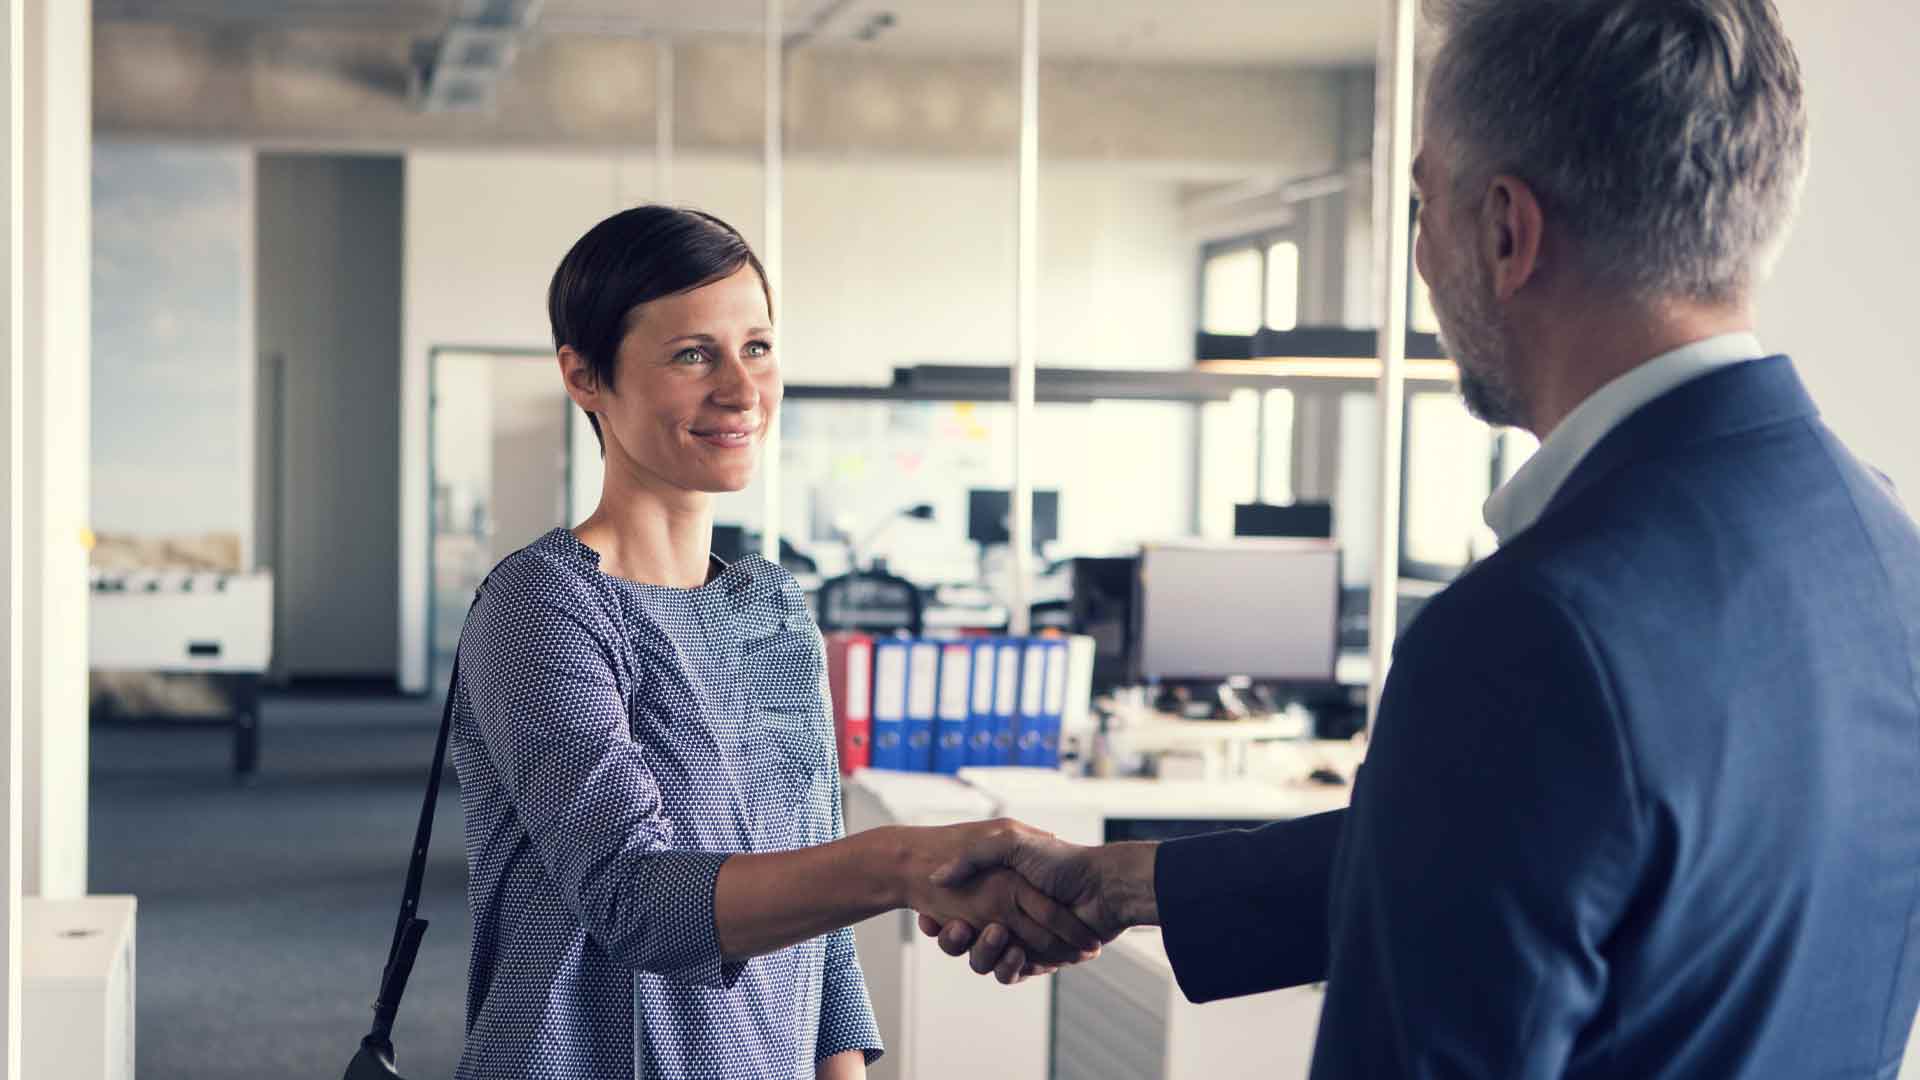 Resigning employee shaking hands with her manager.